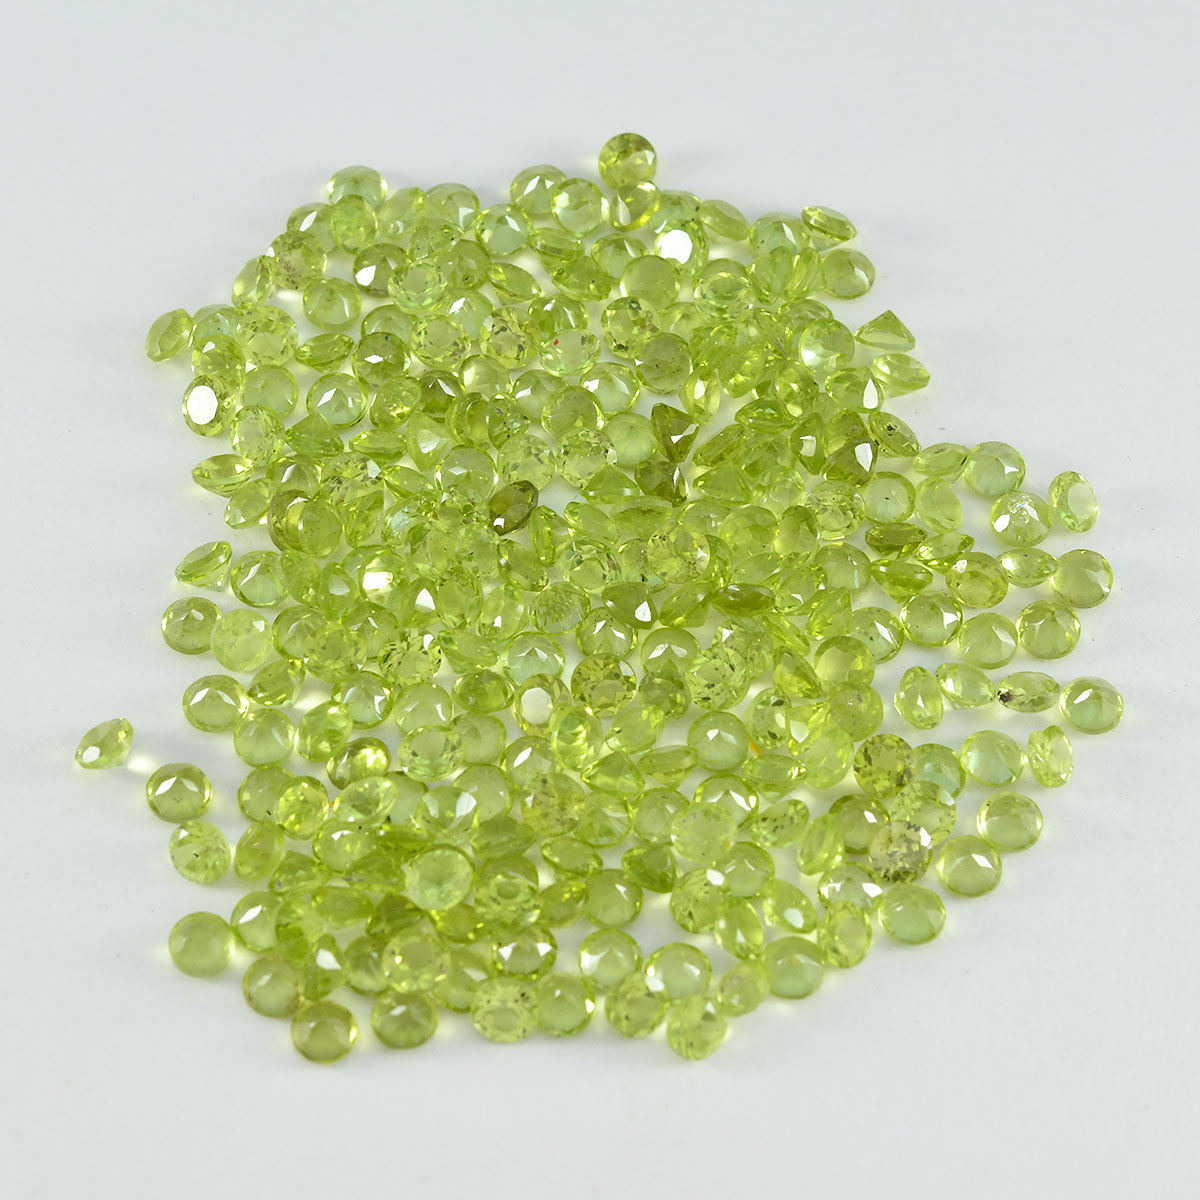 Riyogems 1PC Natural Green Peridot Faceted 2x2 mm Round Shape beauty Quality Loose Gemstone